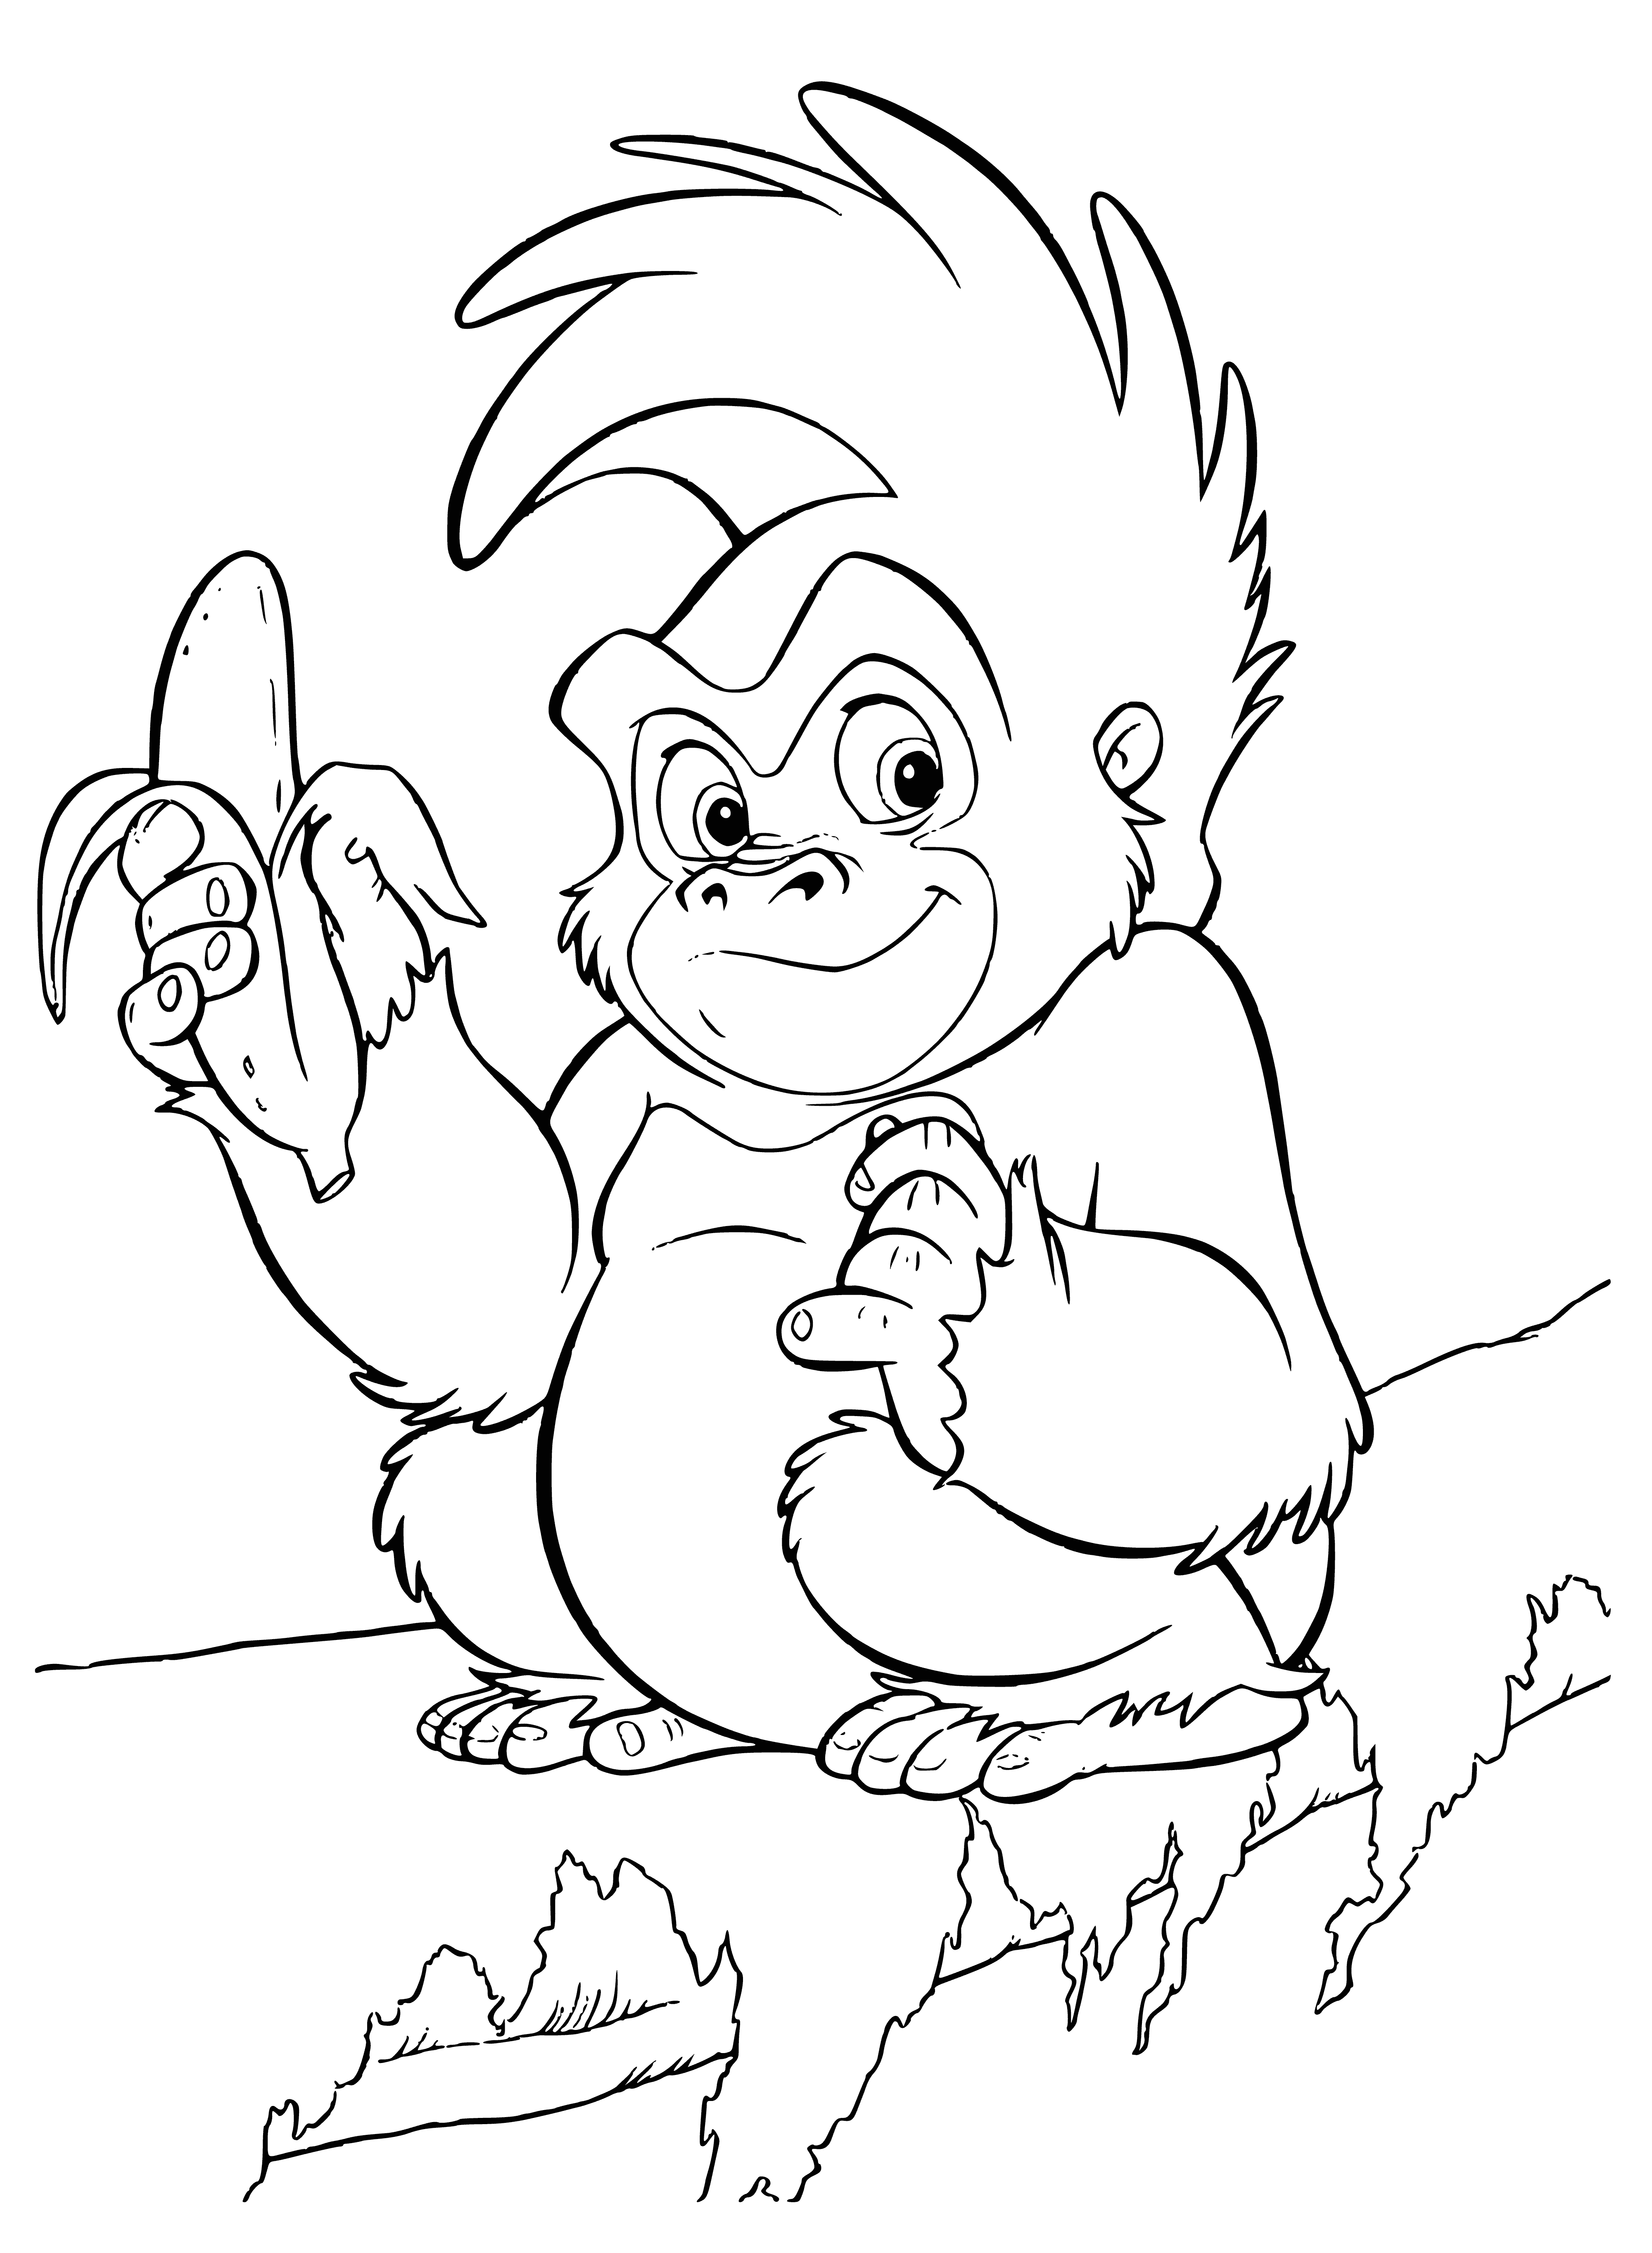 Monkey Turk coloring page